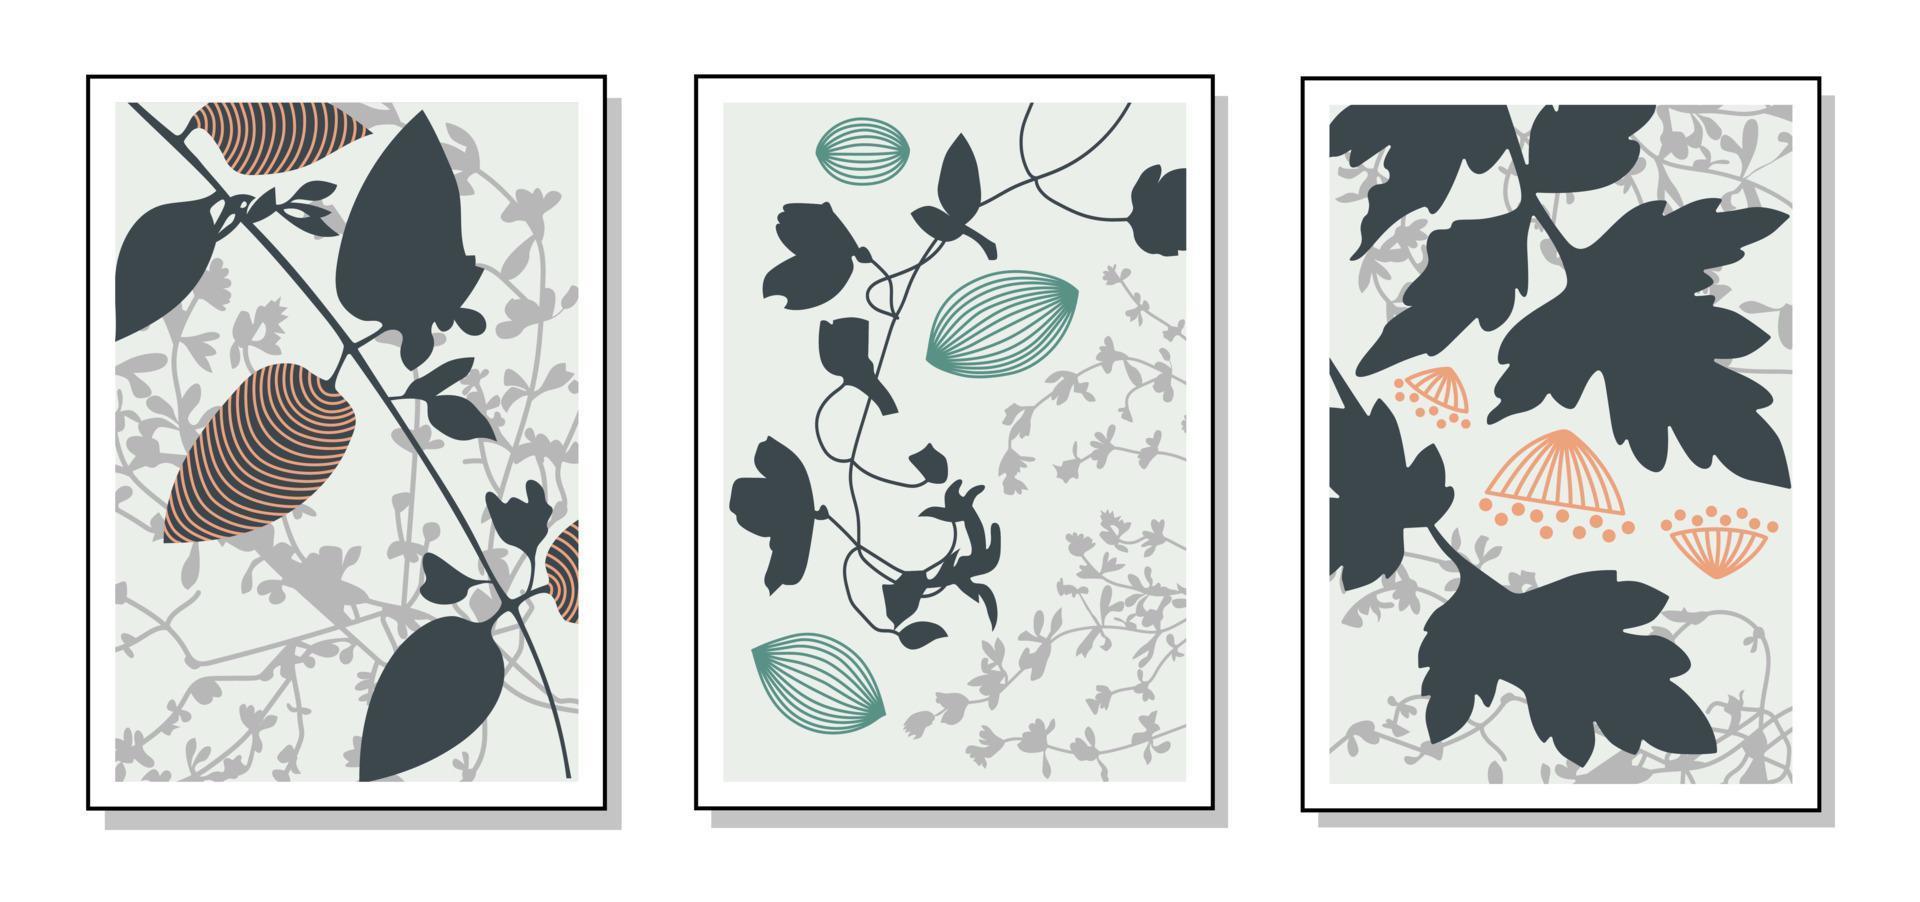 Graceful plants with leaves. Interior graphics. Thin line. Black and white illustrations of flowers, plants for covers, pictures. Vector illustration.